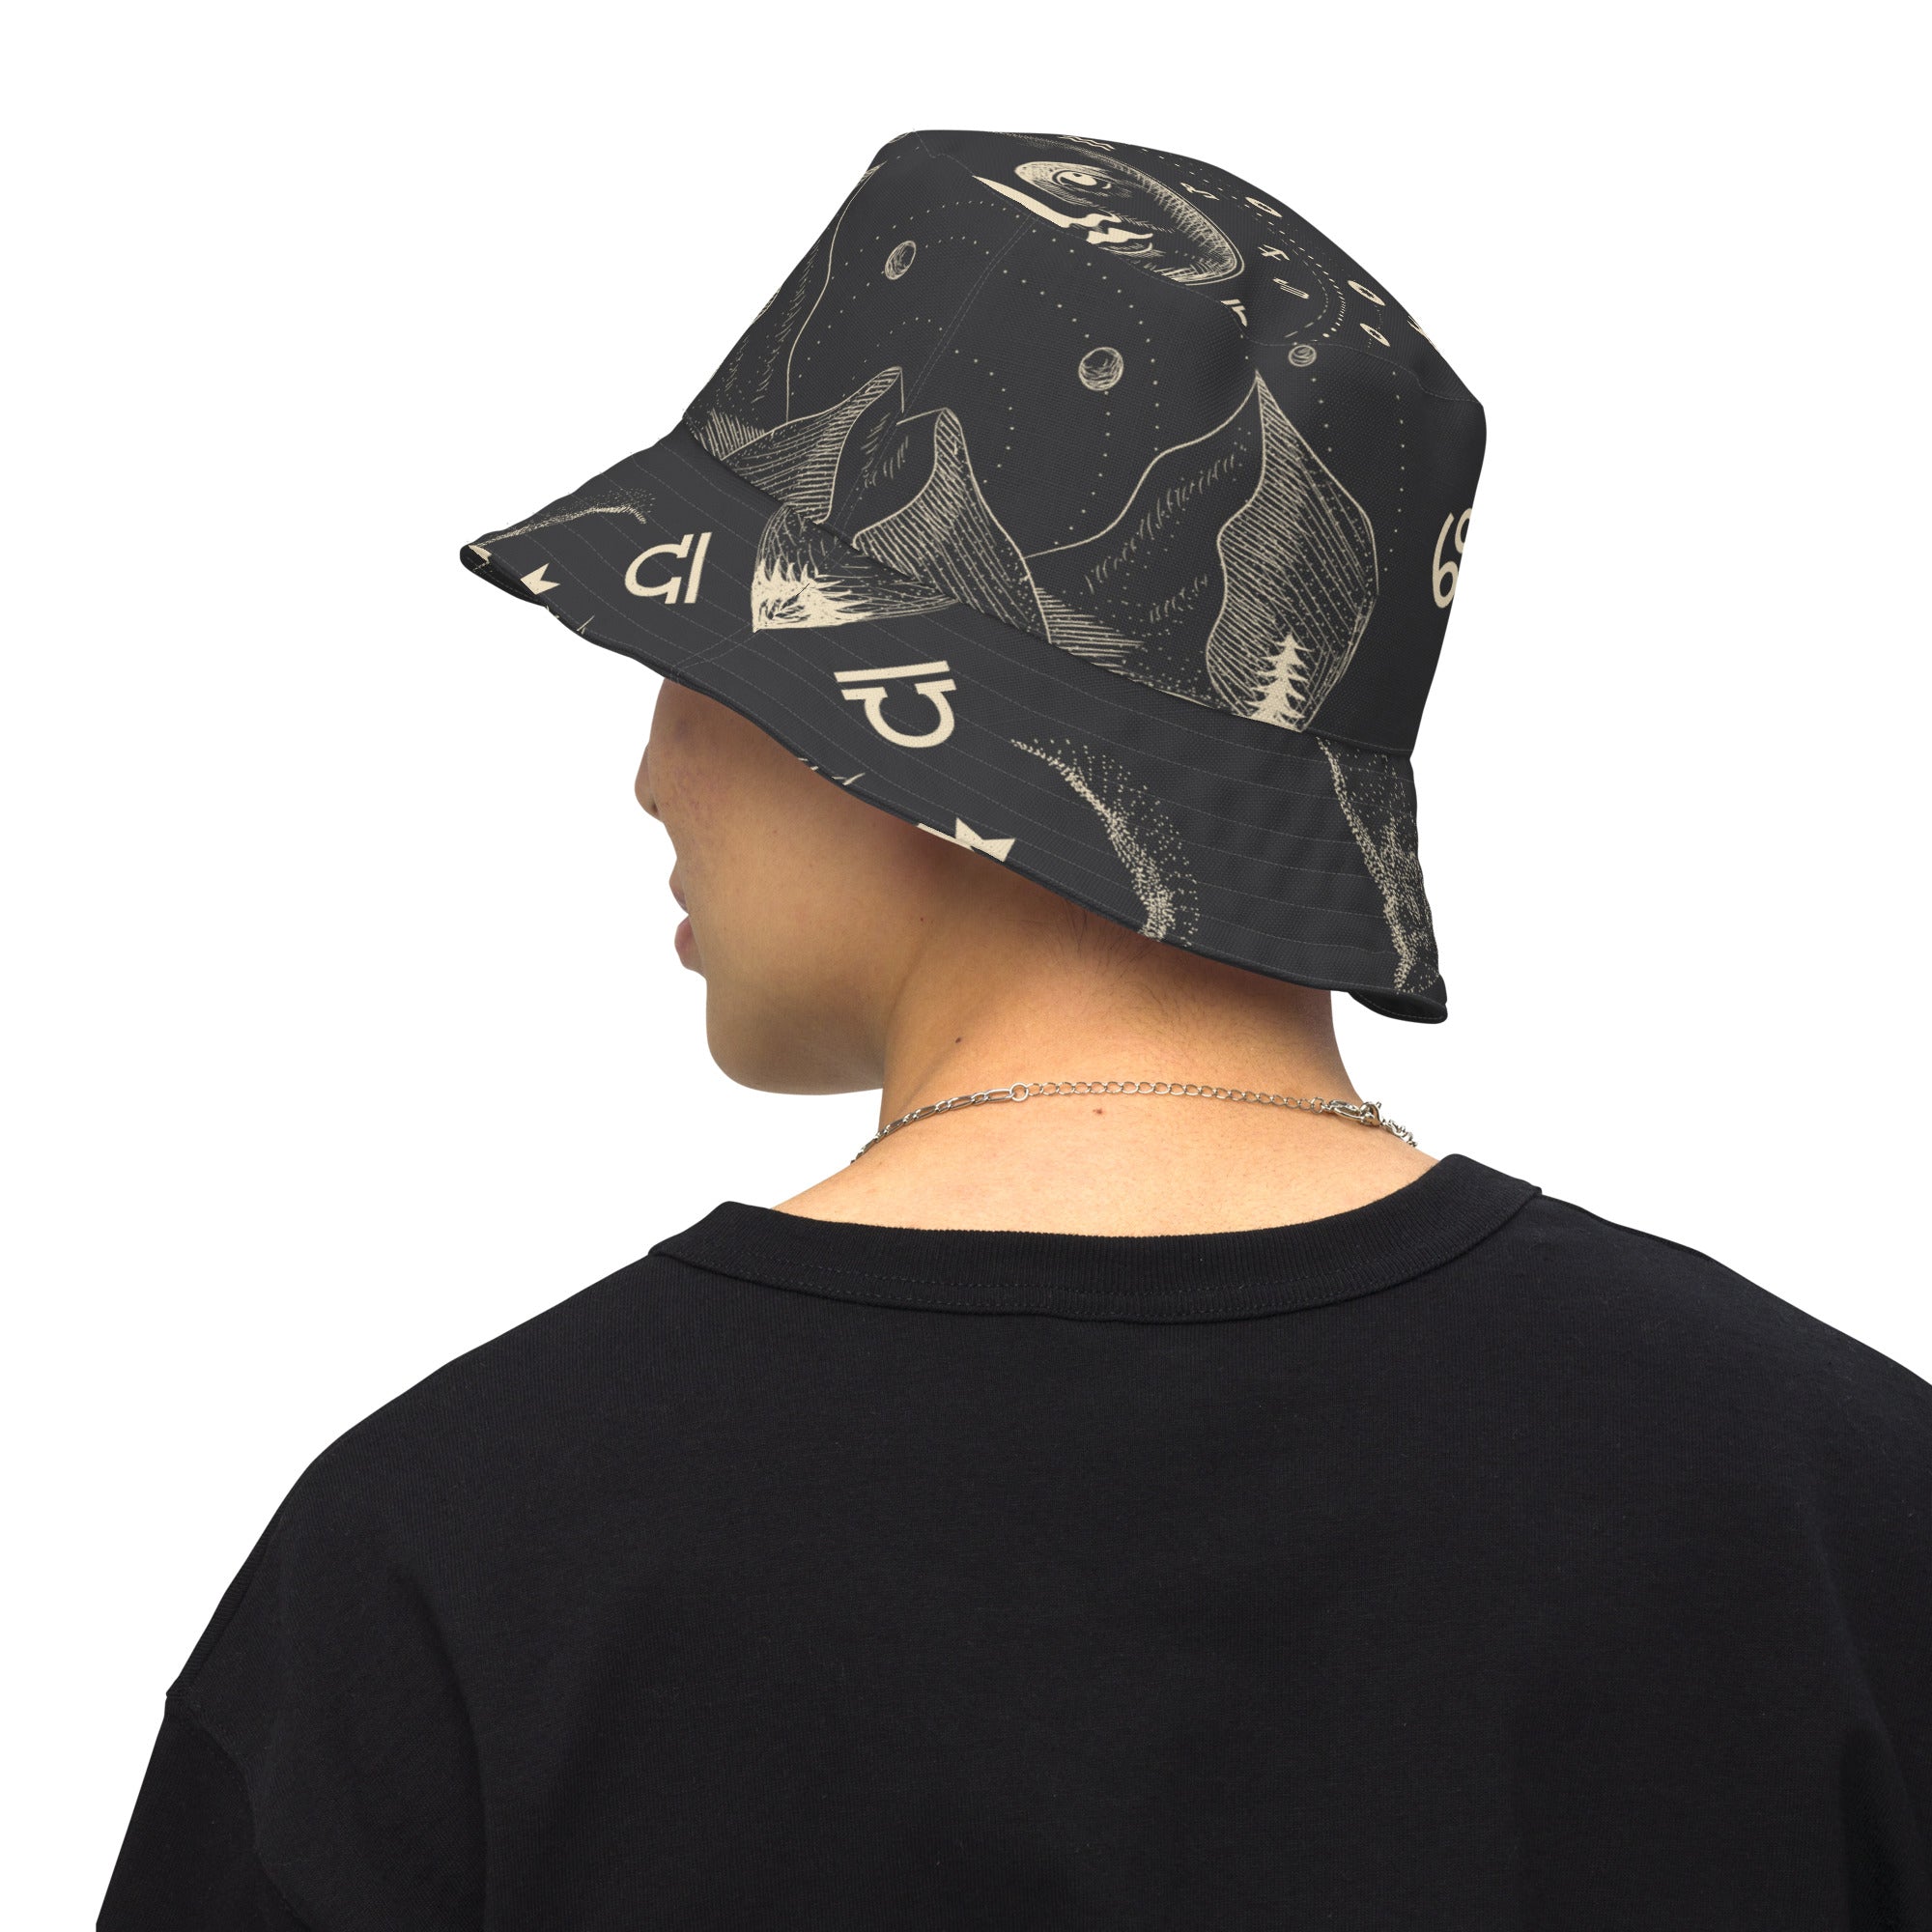 "Cosmic Cool: Explore the Galaxy with Our Space Bucket Hat", lioness-love